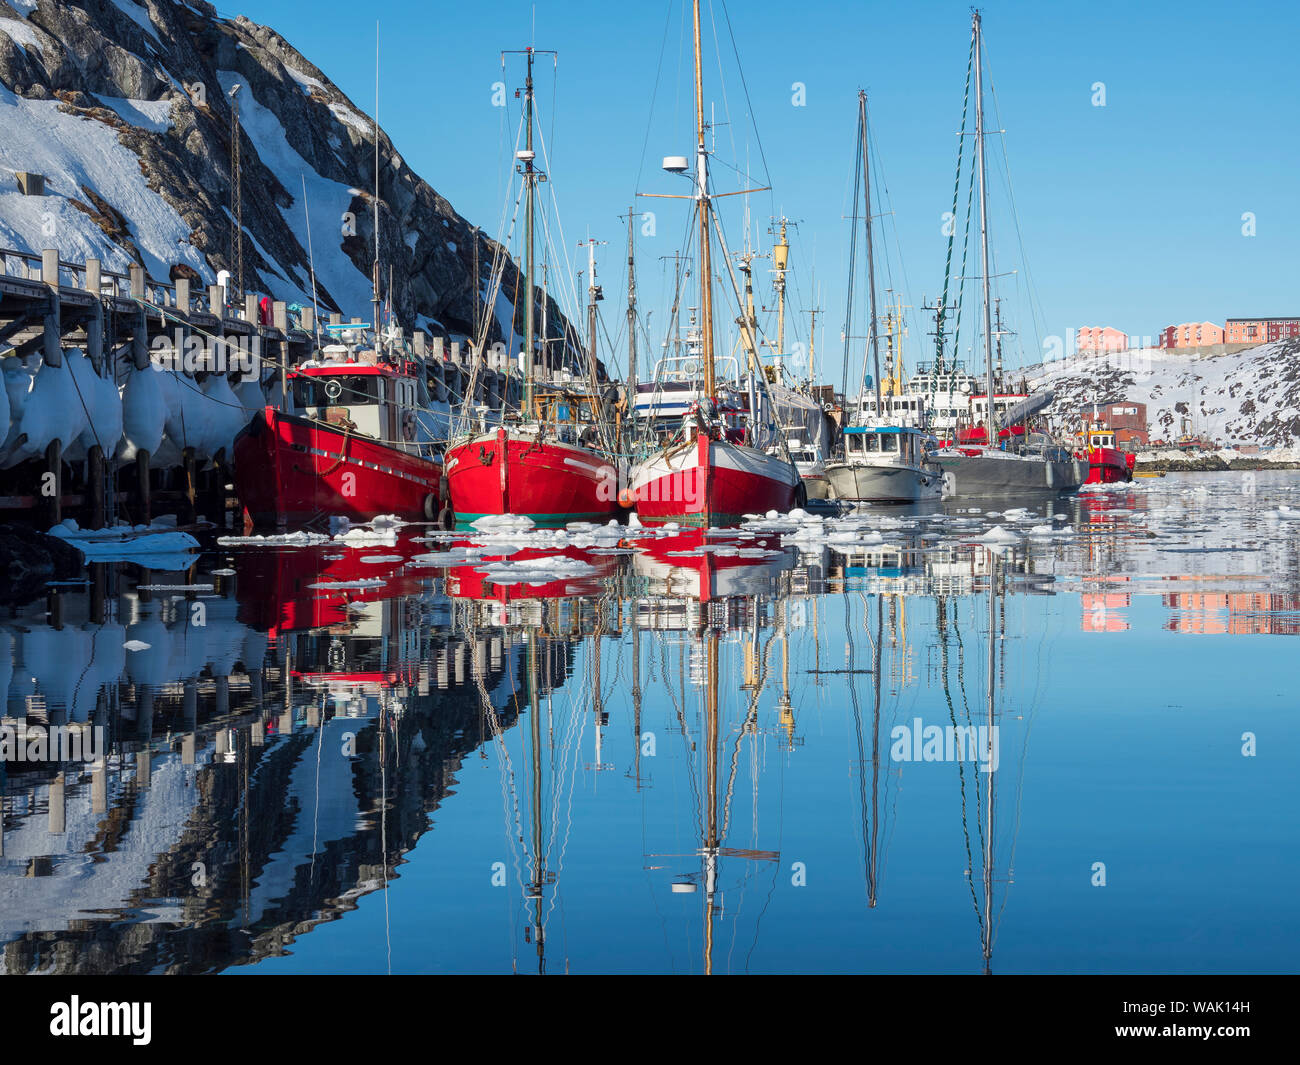 Nuuk Harbor. Nuuk, capital of Greenland. (Editorial Use Only) Stock Photo